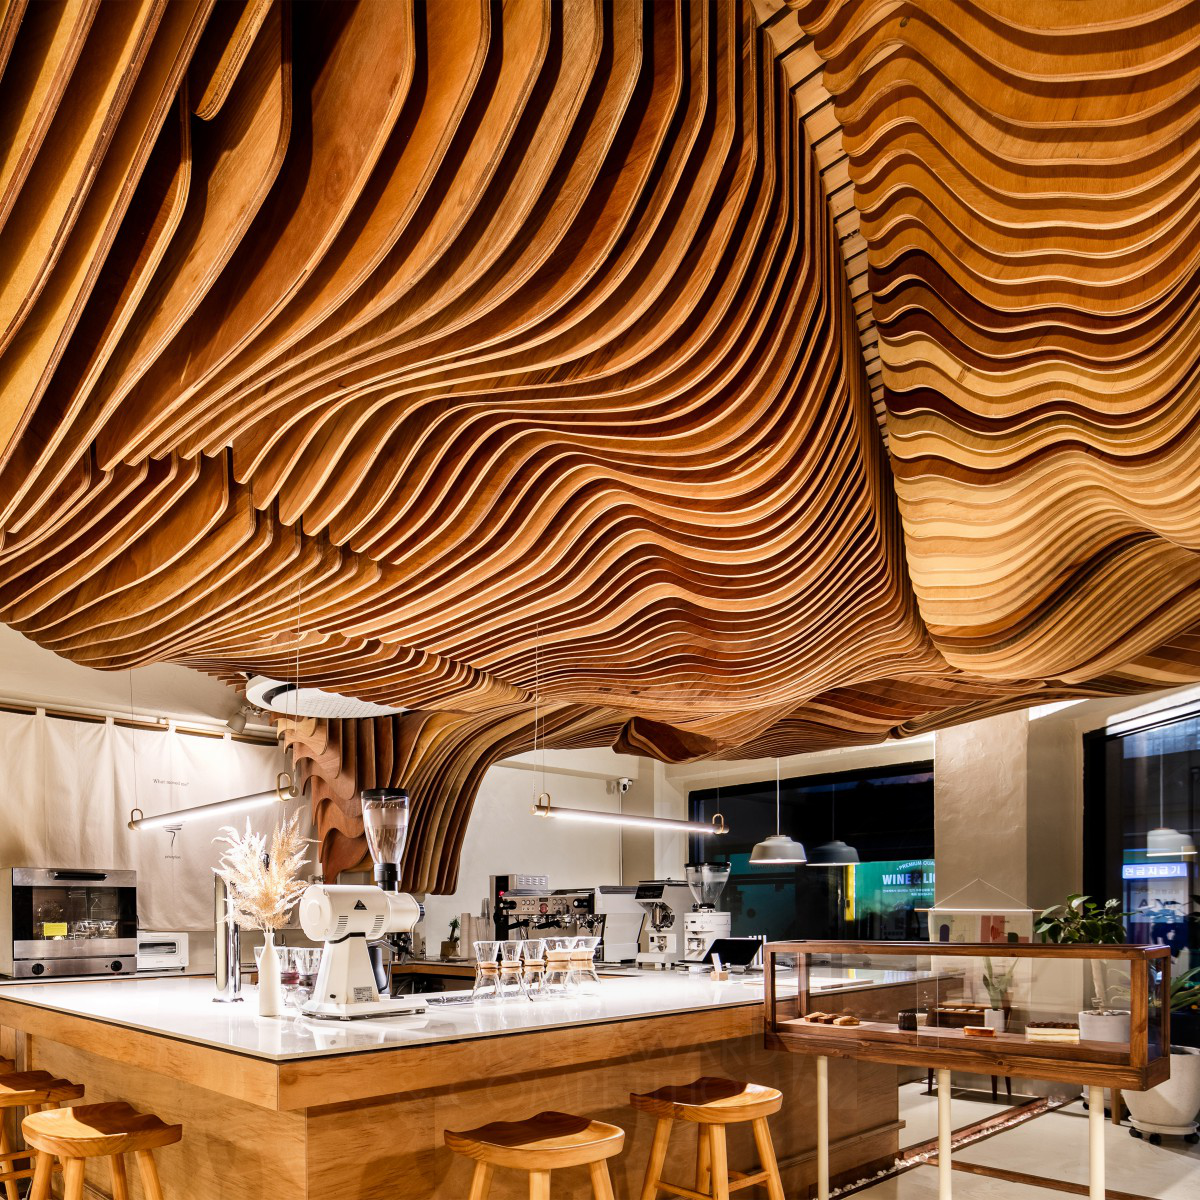 Perception Cafe by Haejun Jung - Feelament Platinum Interior Space and Exhibition Design Award Winner 2020 